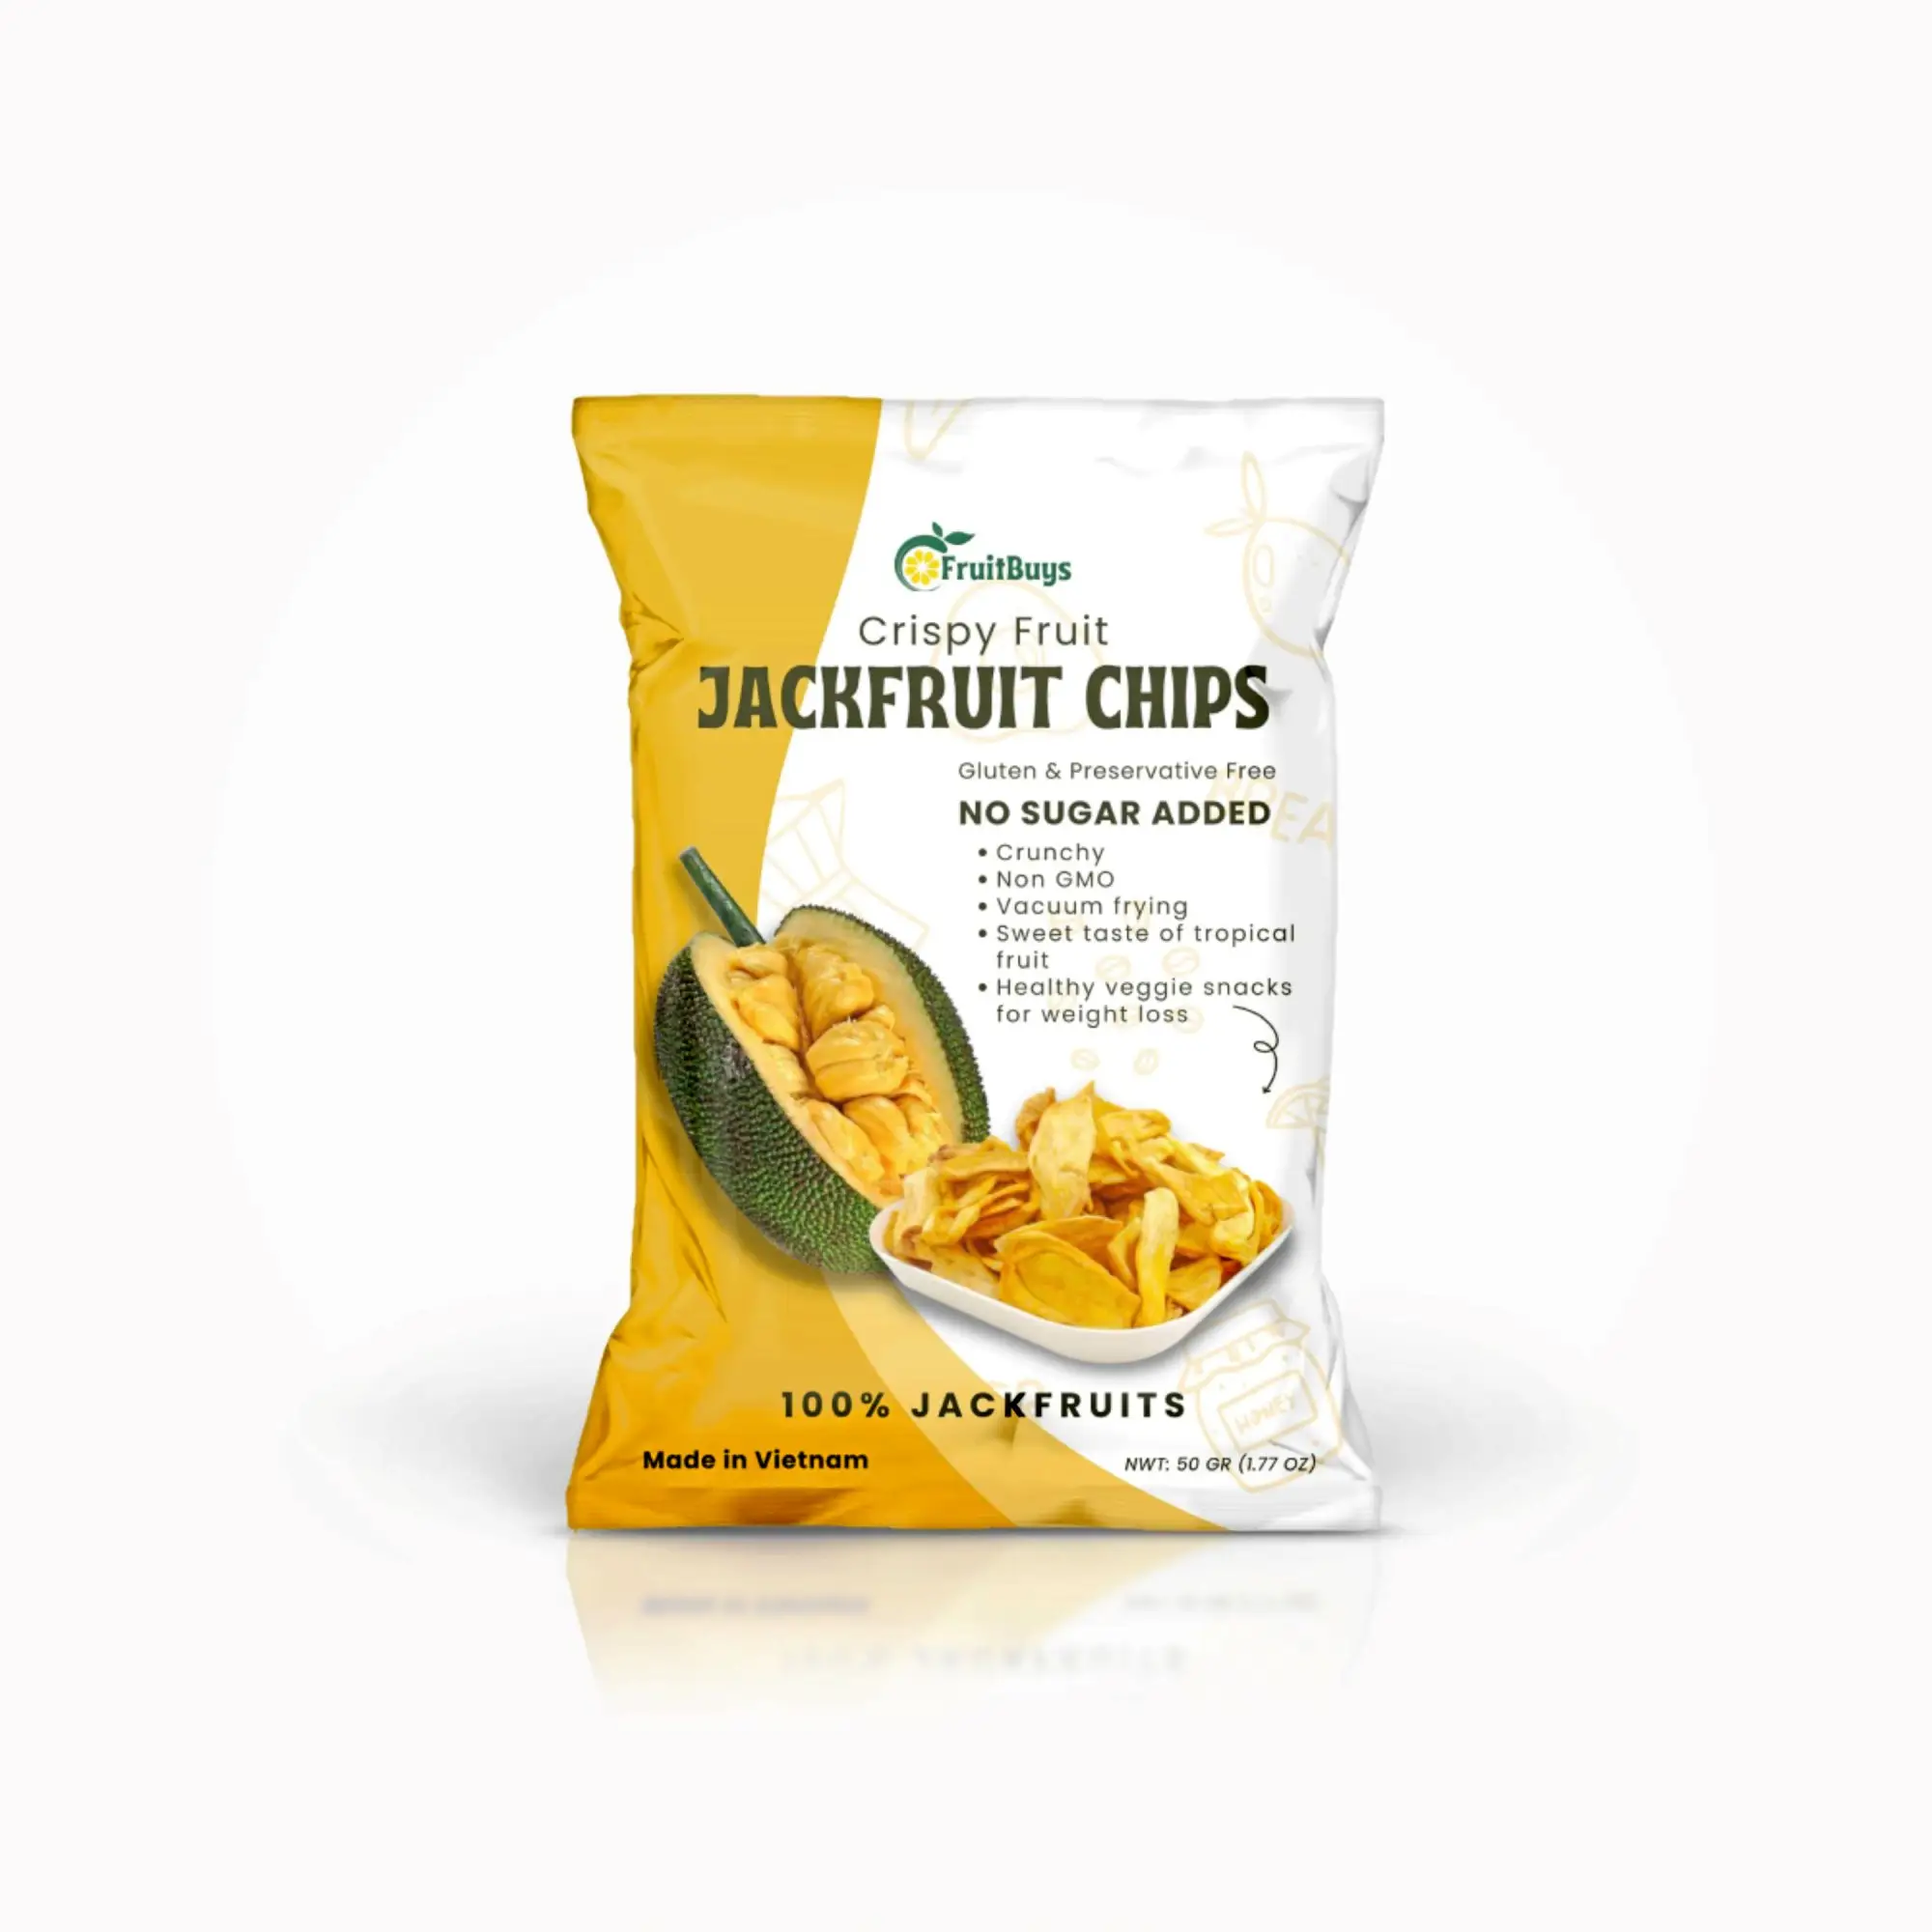 Dried Fruit & Vegetable Snacks Crispy Jackfruit Chips No Sugar Added For Weight Loss Shelf Life 12 Months Without Preservatives